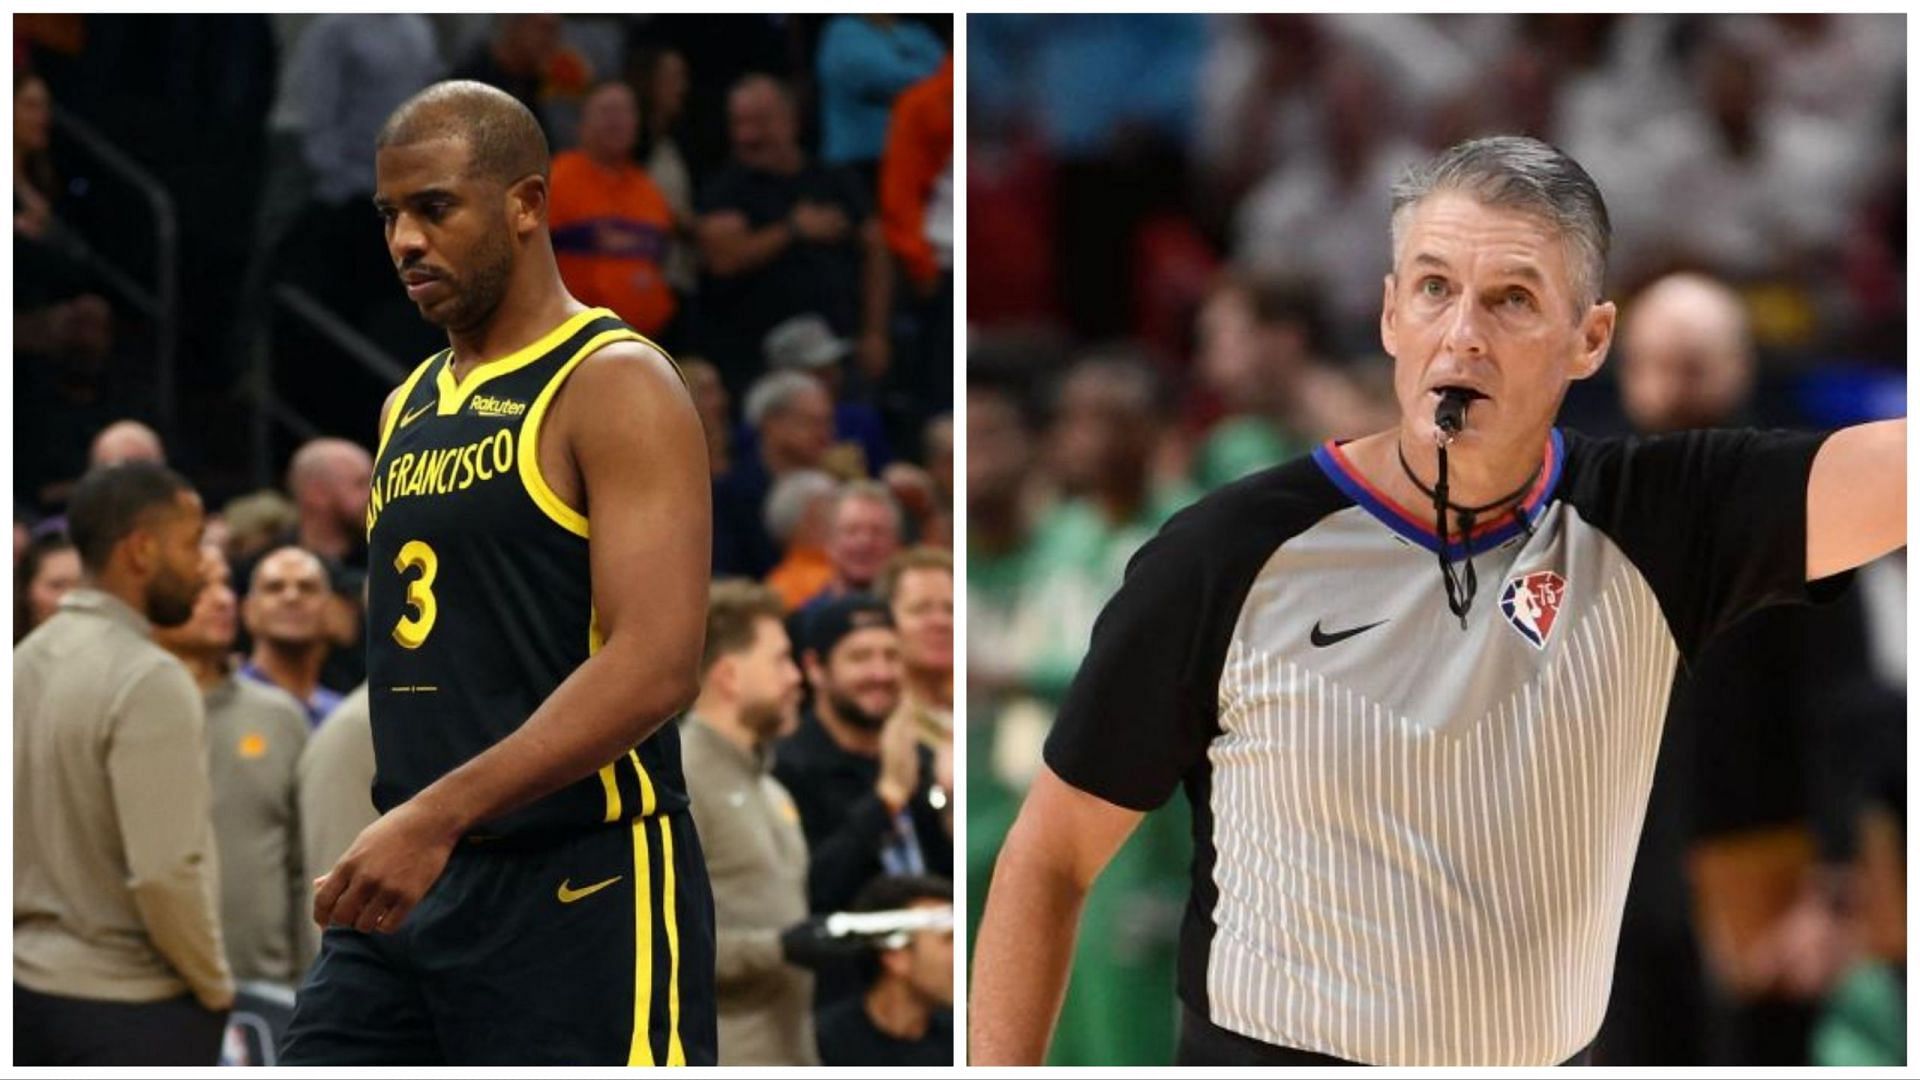 Chris Paul (left) has created a beef with referee Scott Foster (right), while he holds a 3-17 playoff record in games that Foster is an official